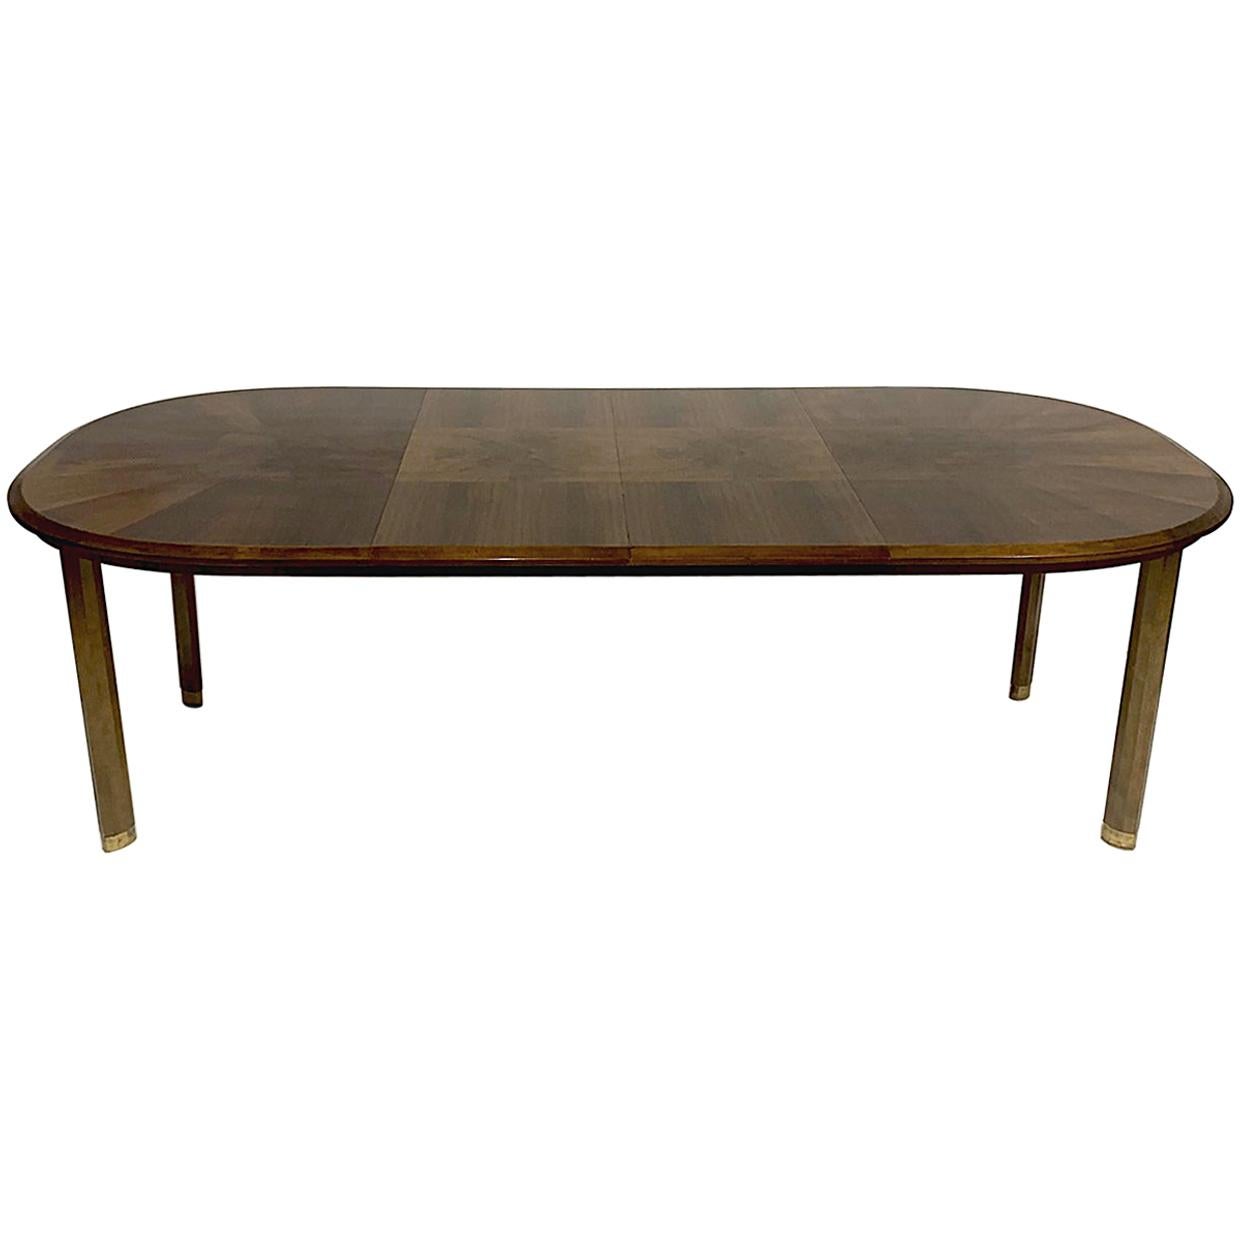 Edmond J. Spence Mixed Wood Oval Extension Dining Table w Burled Elm & Walnut y